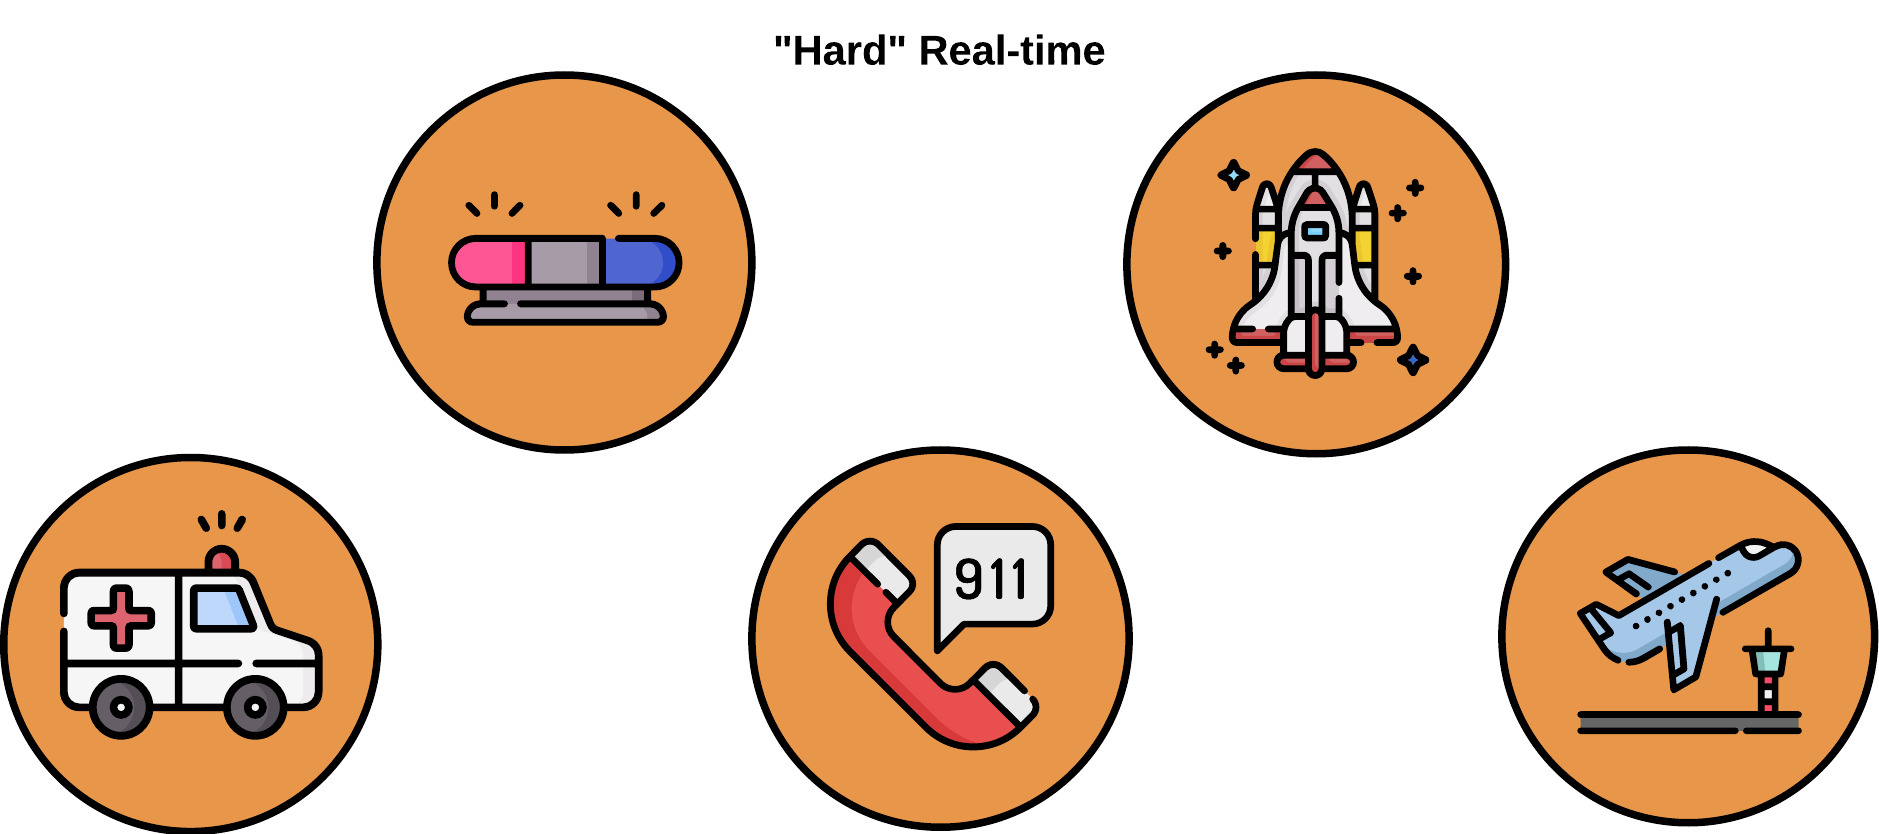 Diagram of hard real-time